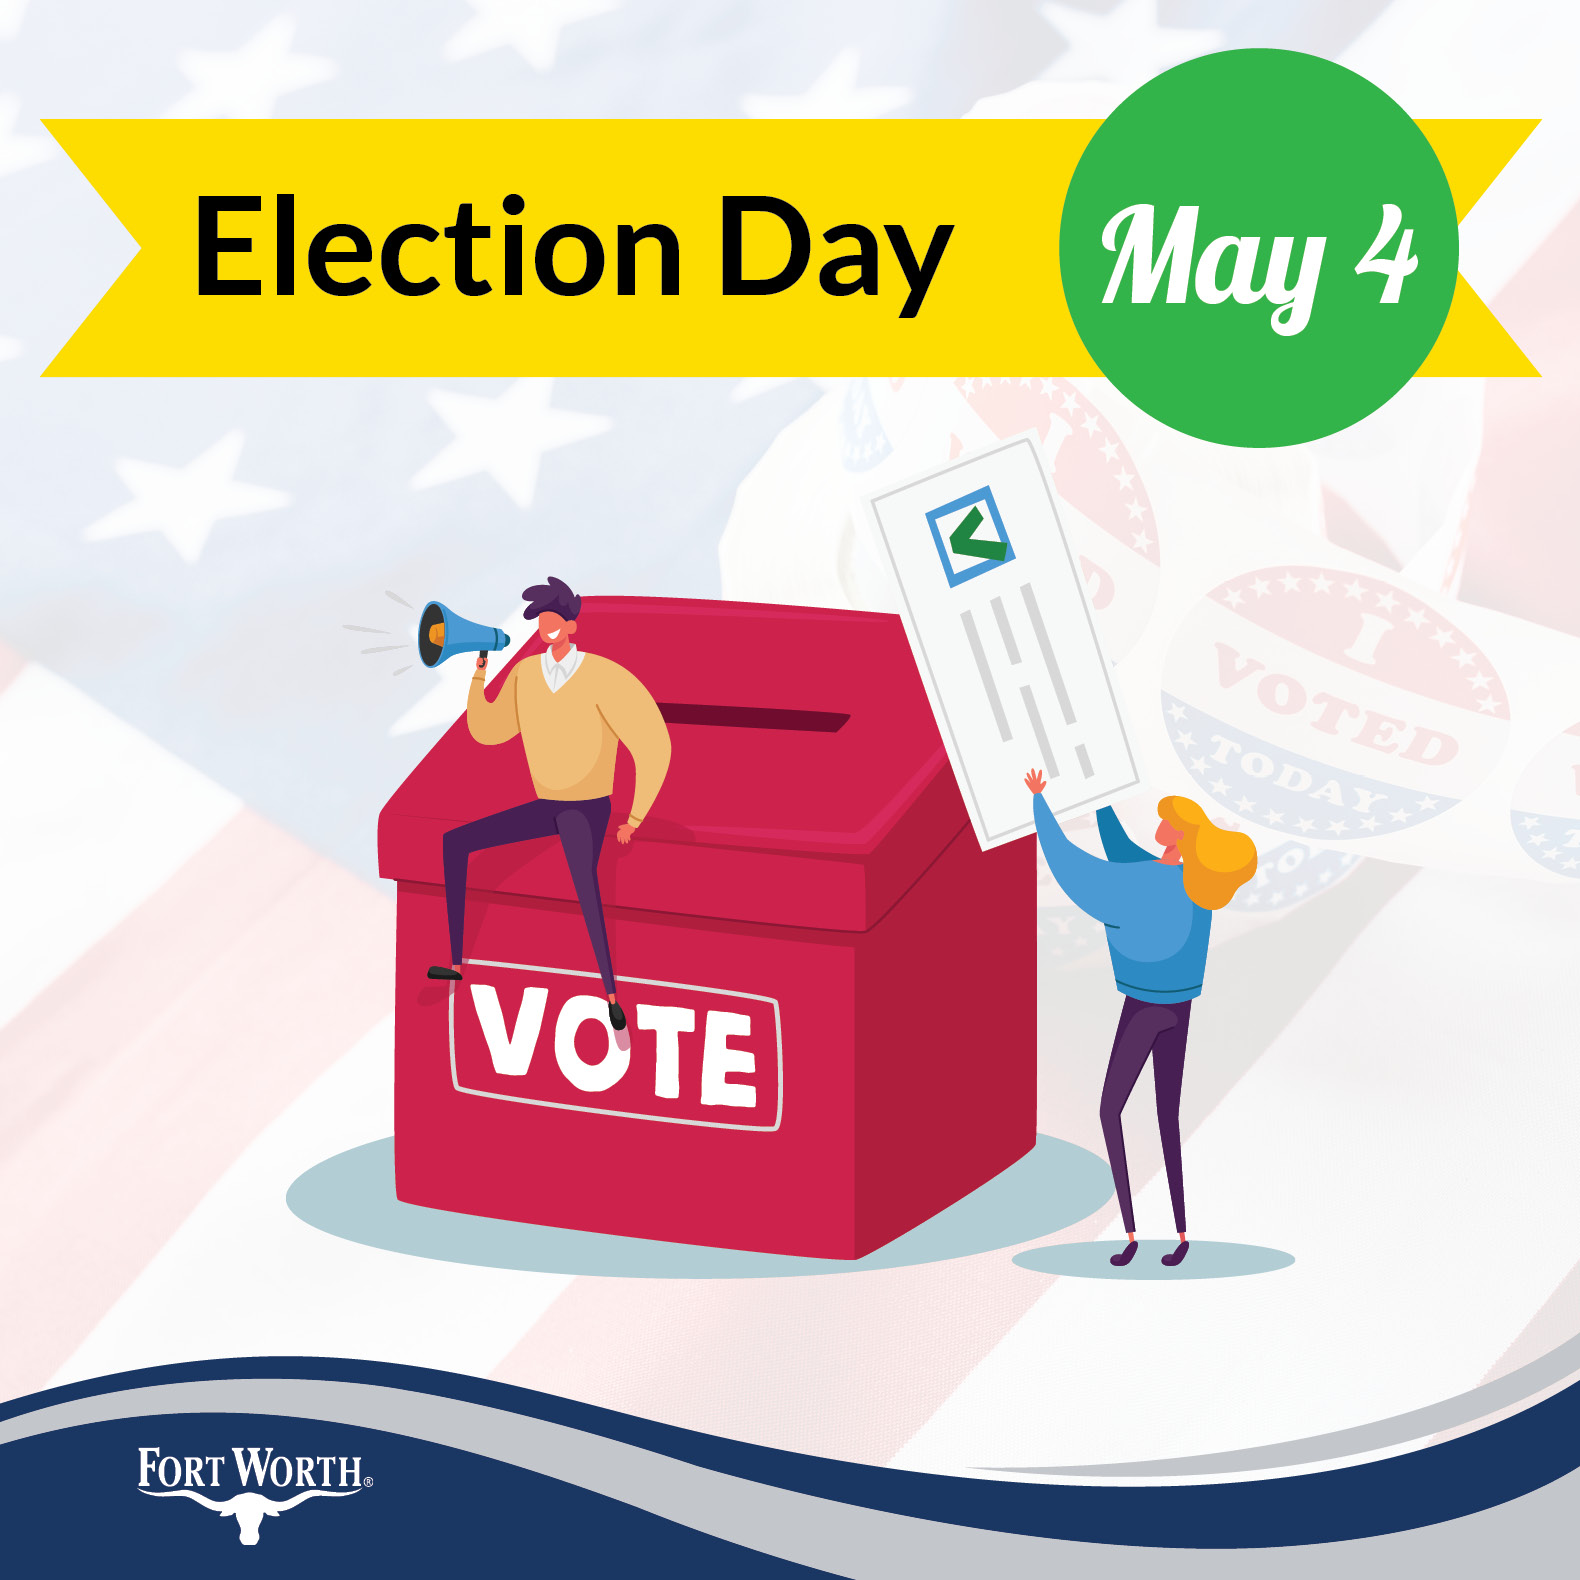 Registration deadline for May 4 election is Thursday